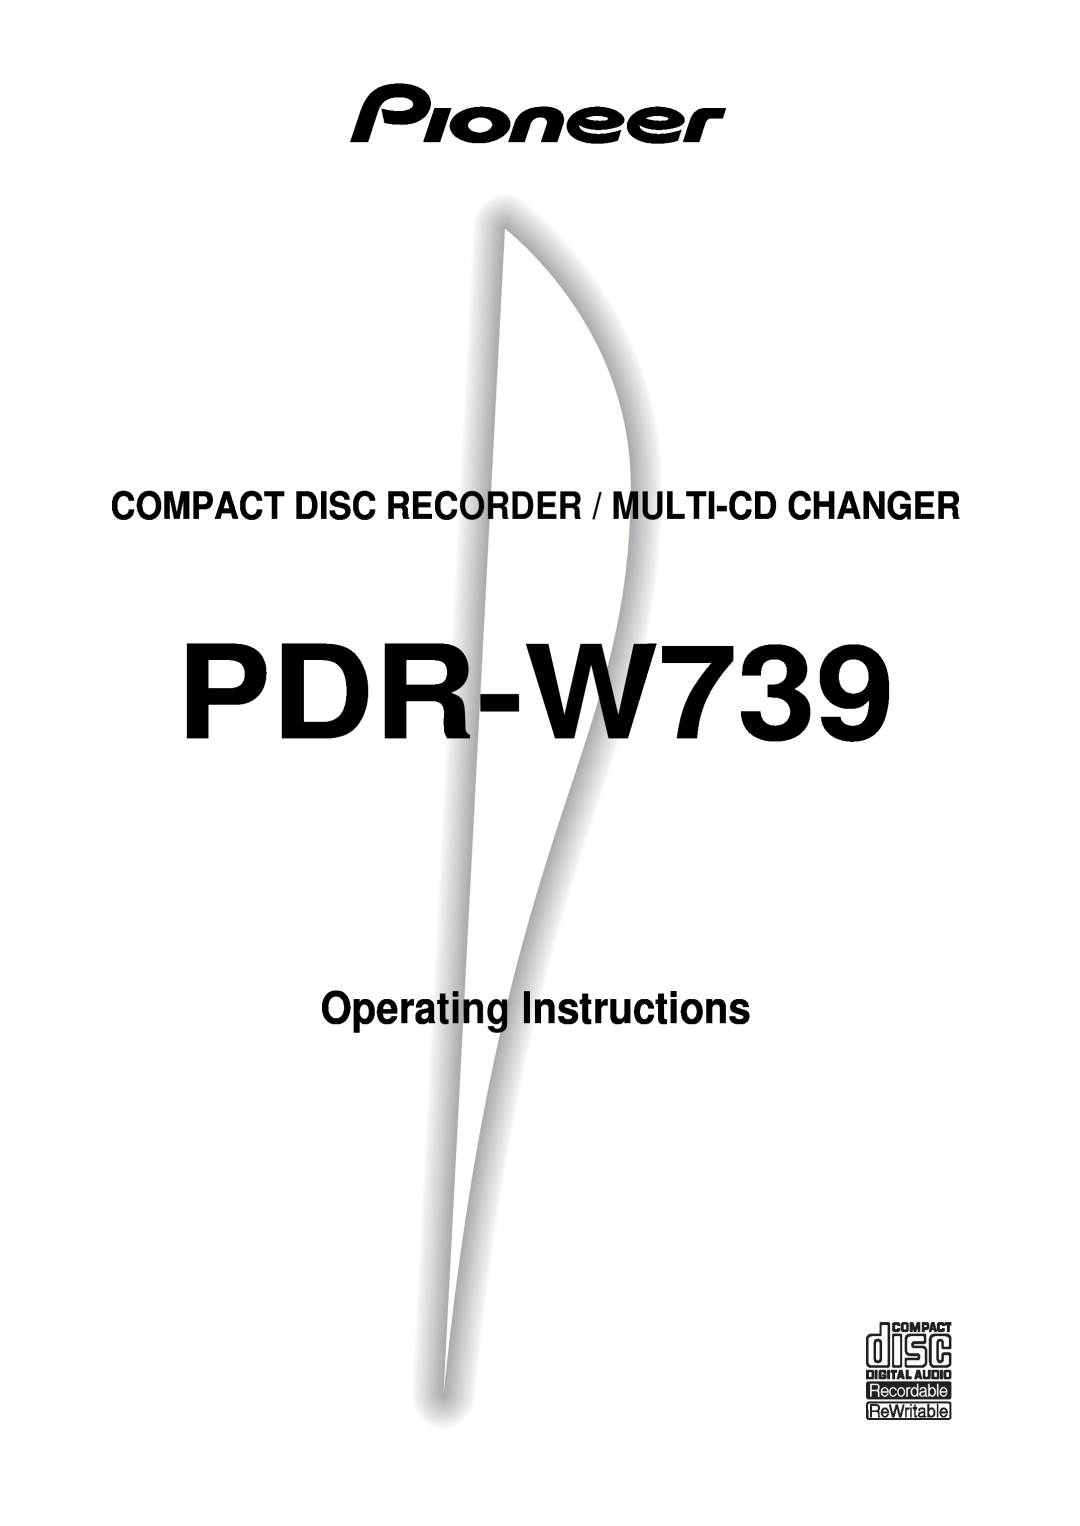 Pioneer PDR-W739 manual Operating Instructions, Compact Disc Recorder / Multi-Cdchanger 